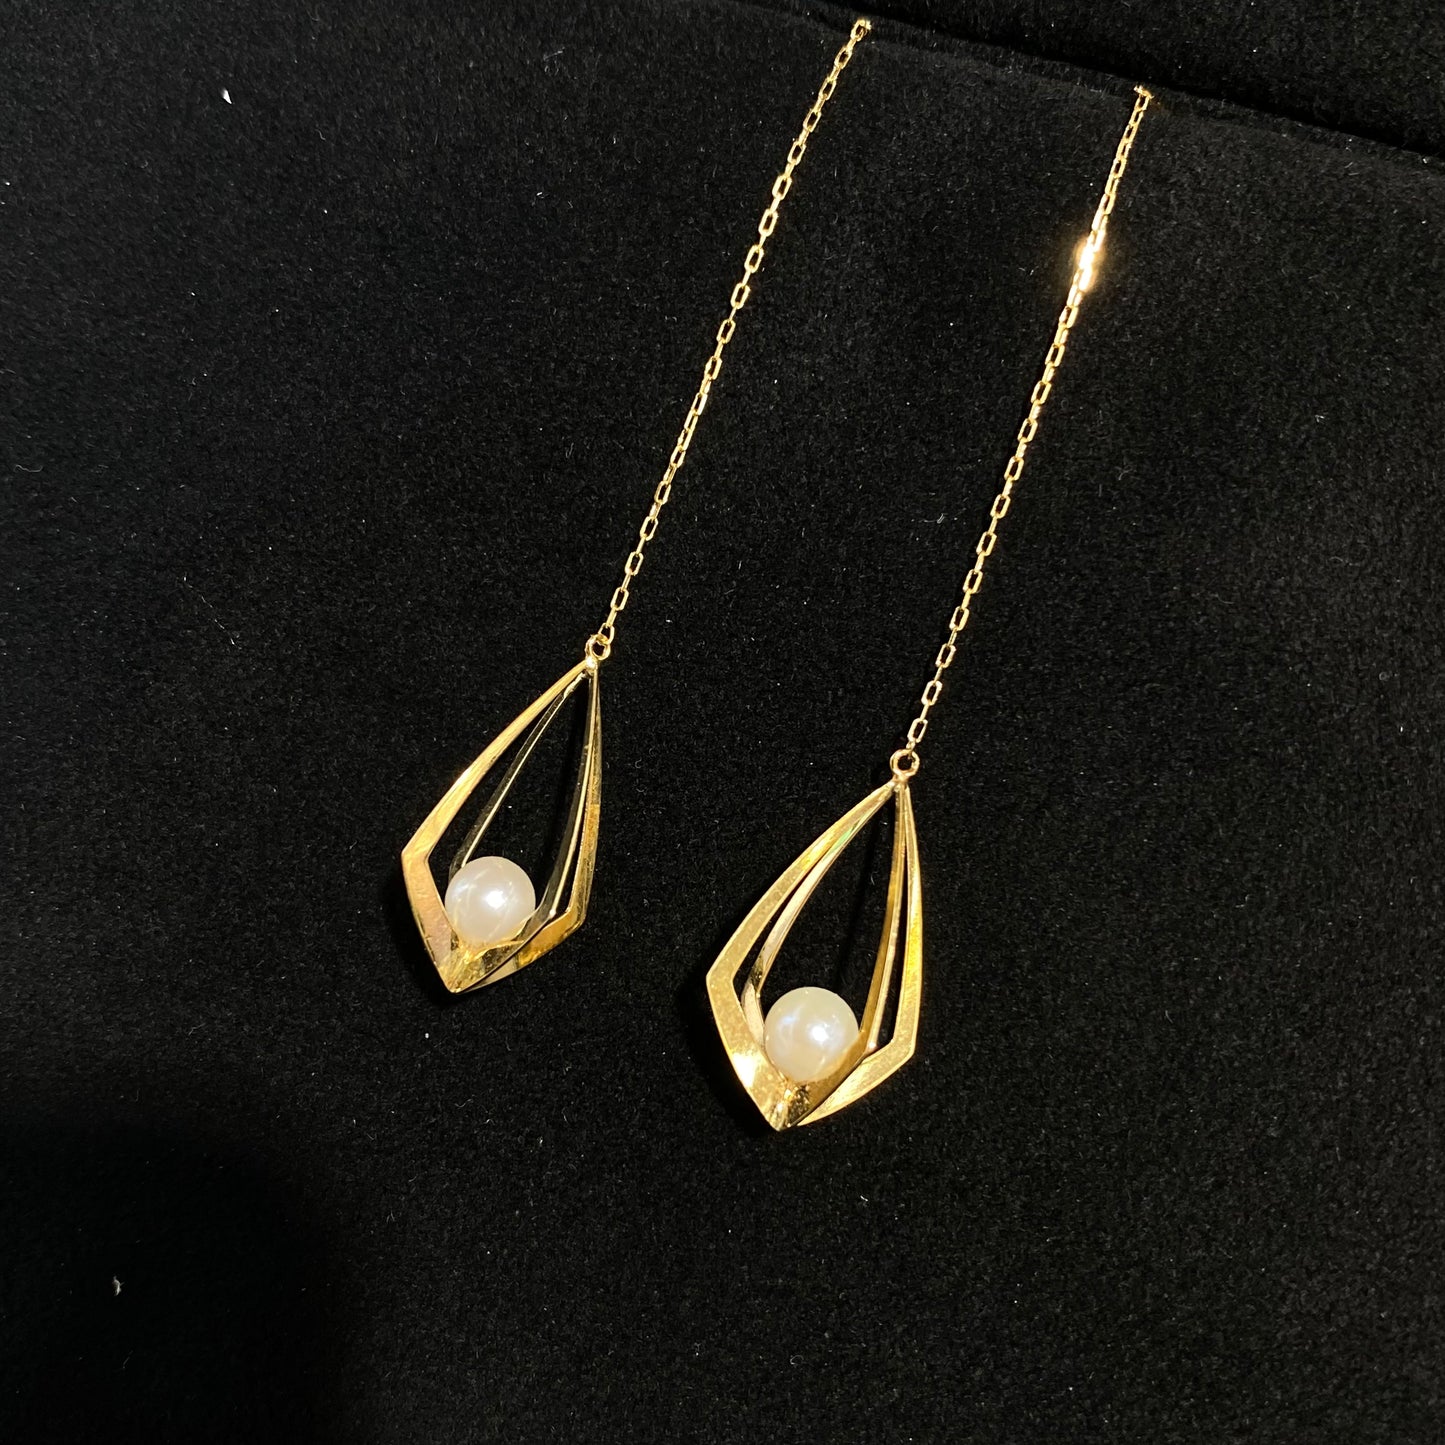 Rhombus-Shaped Hollow Earrings with Akoya Seawater Pearls in 18K Yellow Gold